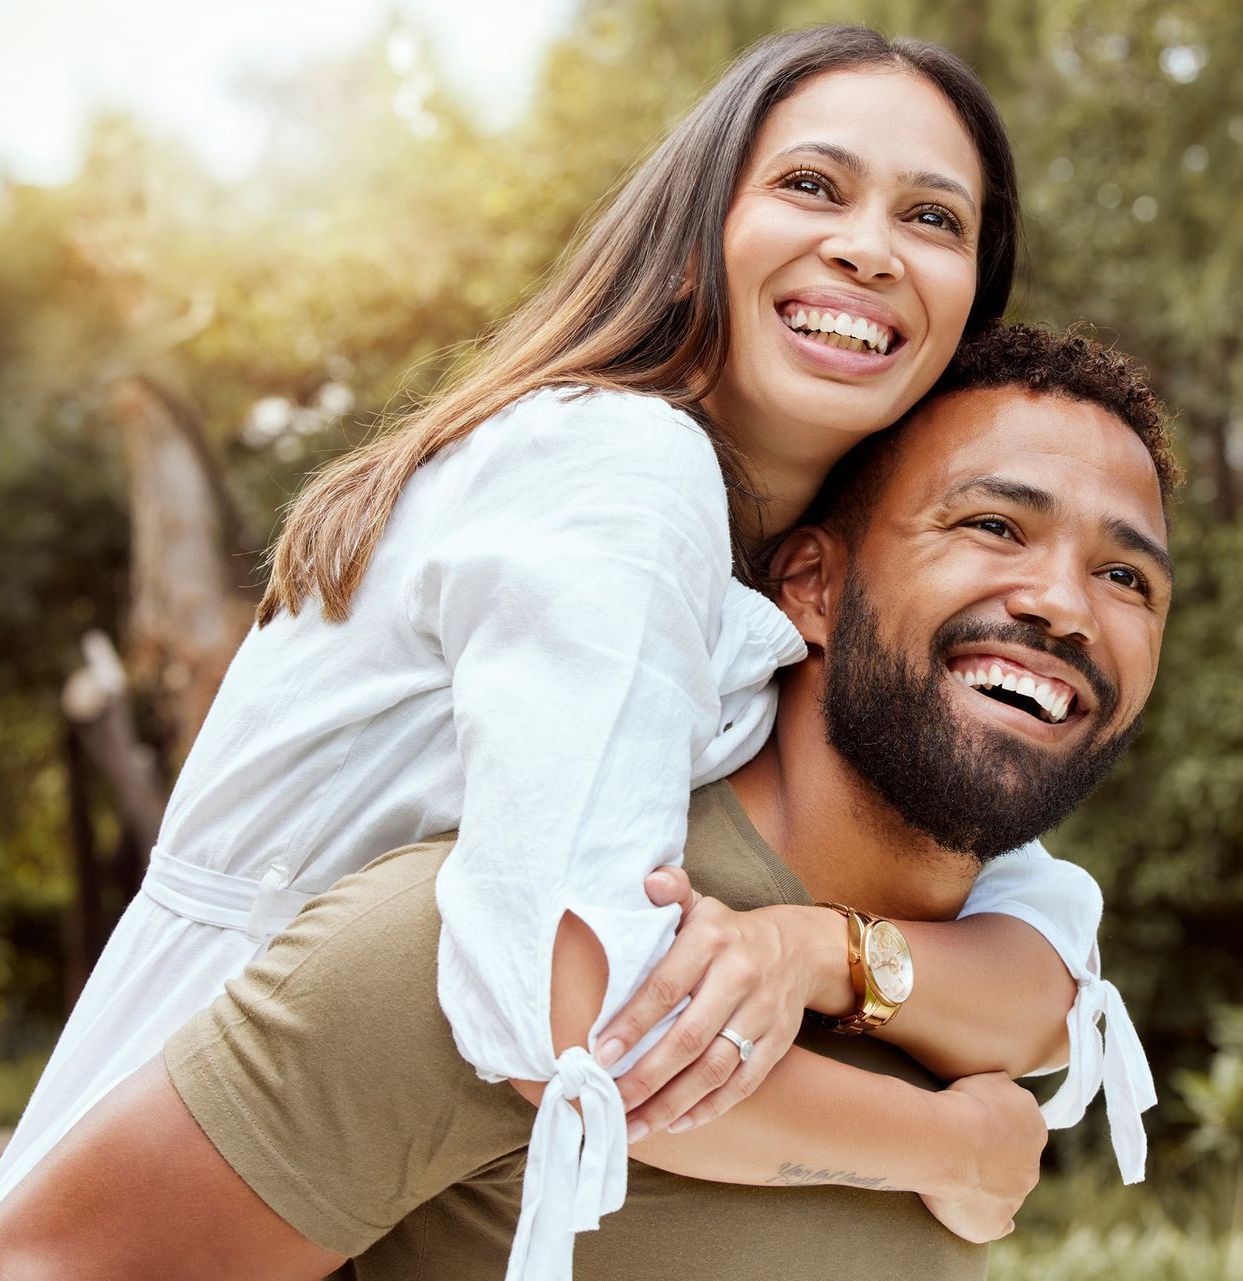 A man is carrying a woman on his back and they are smiling.